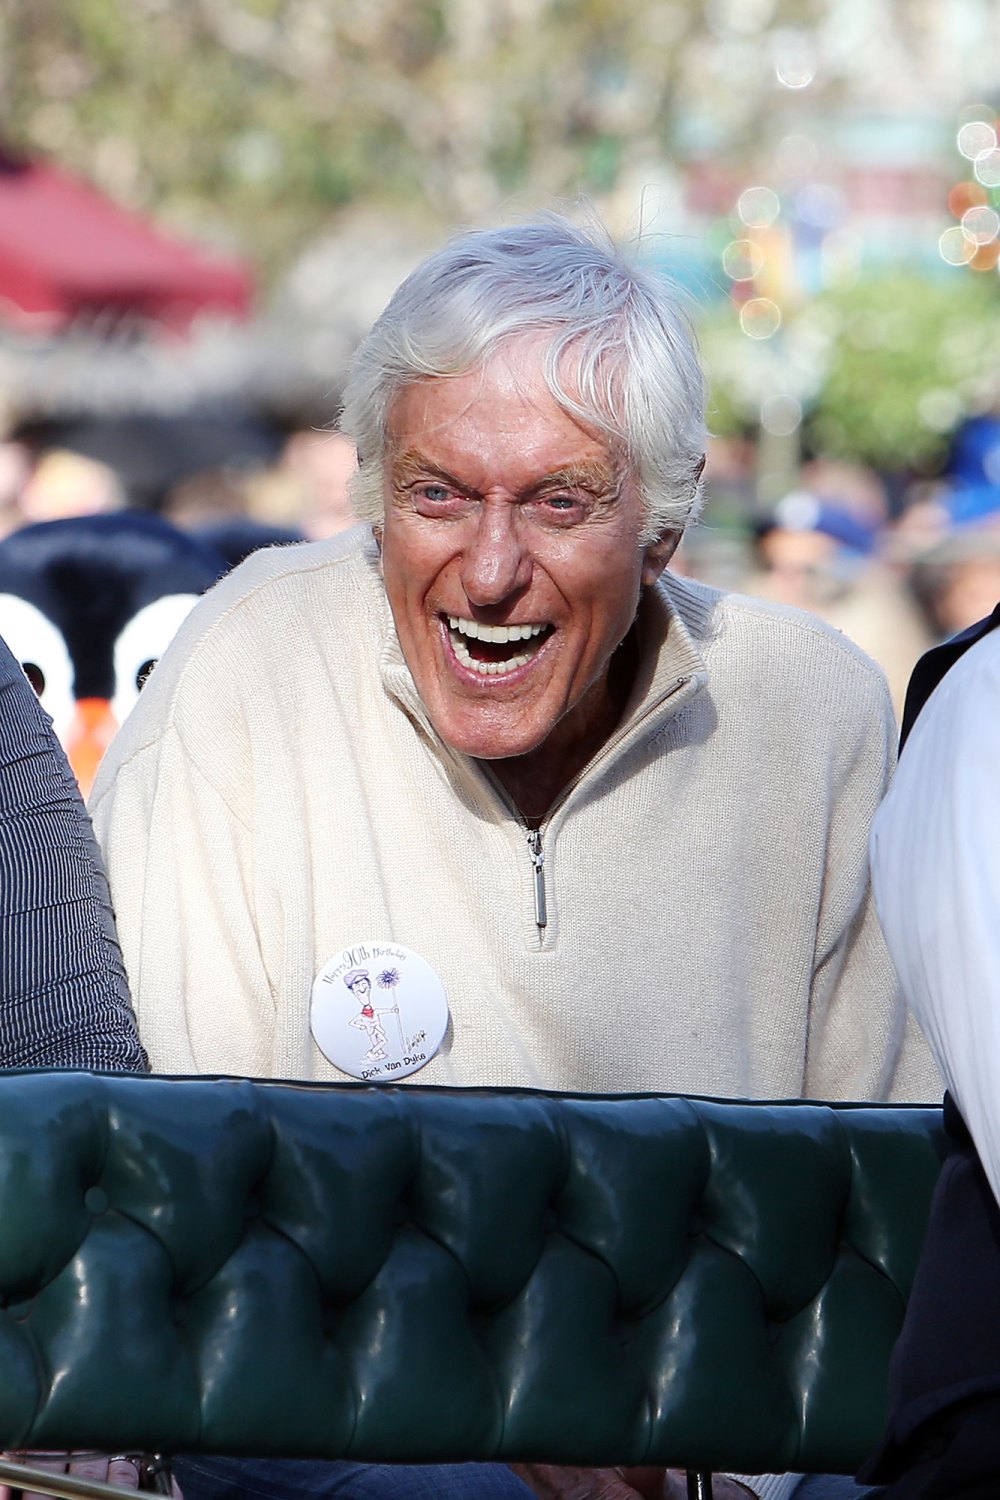 Dick Van Dyke Sings Mary Poppins Songs With Flash Mob on 90th Birthday